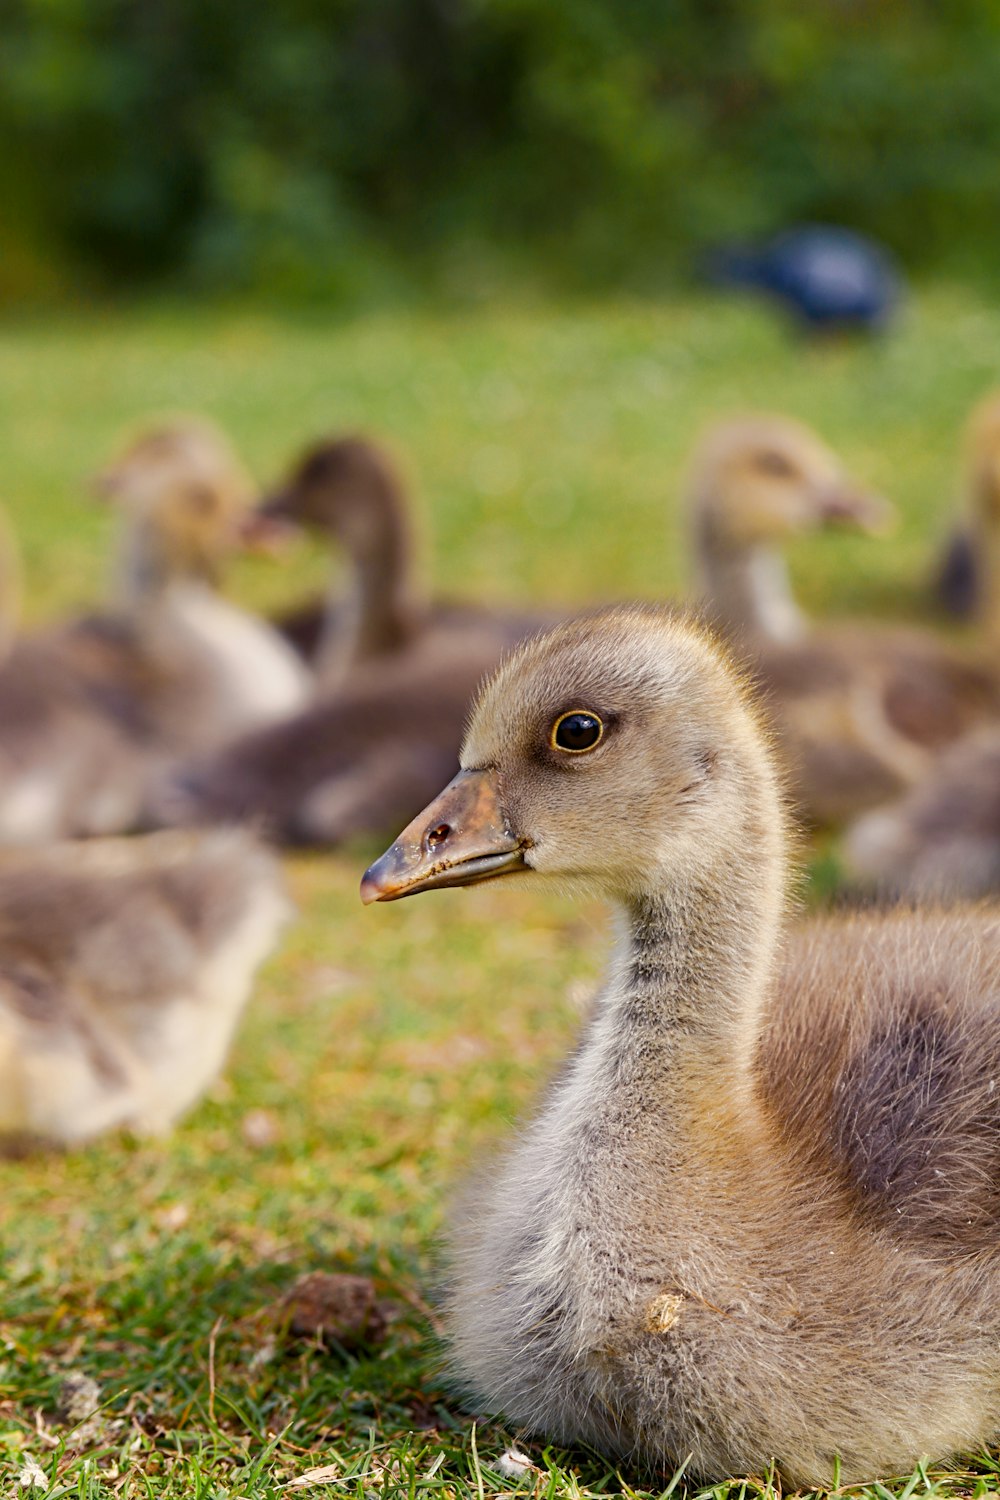 flock of ducklings on green grass field during daytime